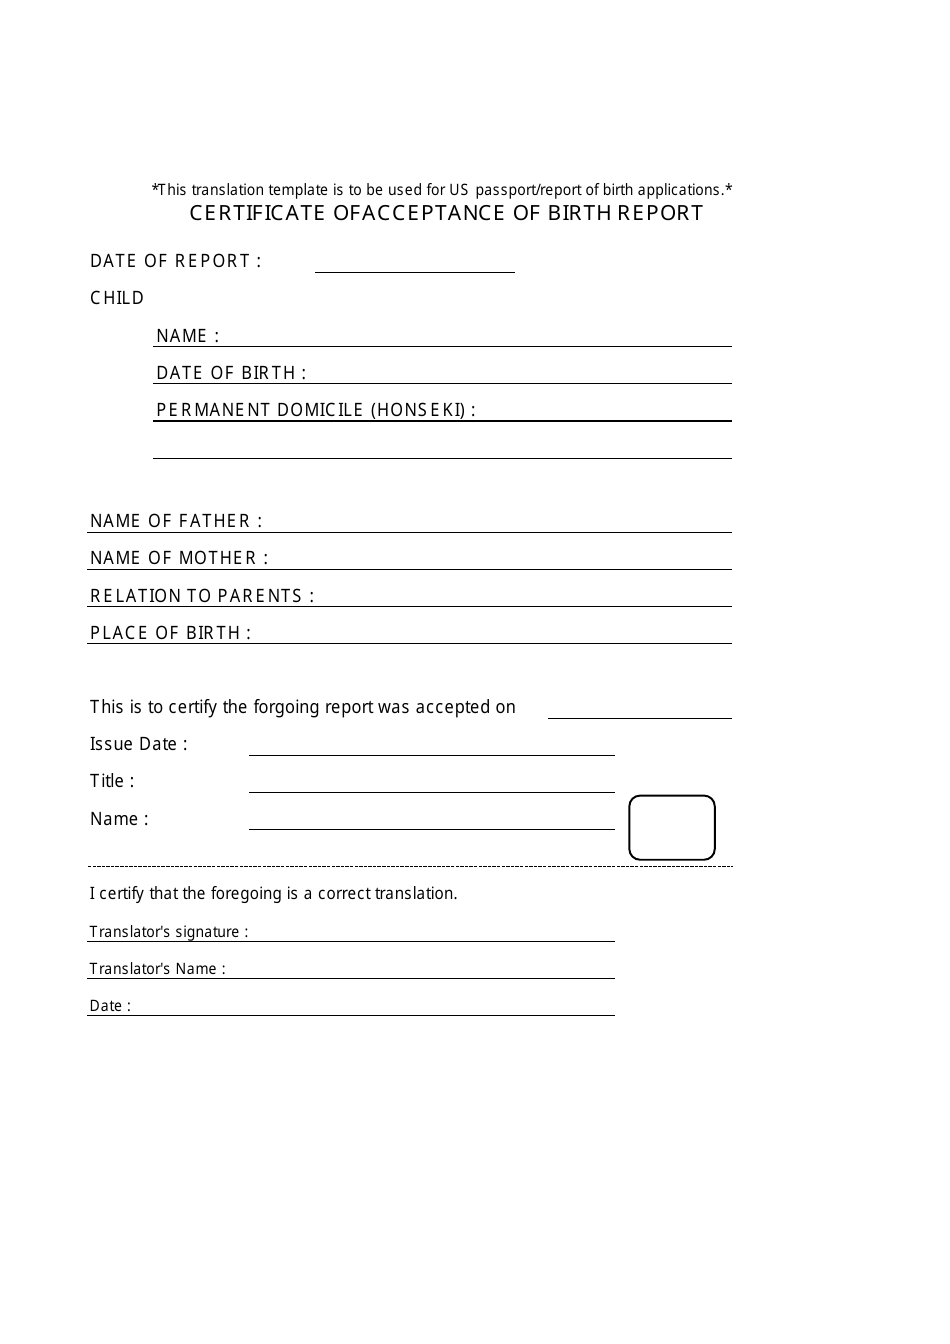 Certificate of Acceptance of Birth Report Download Printable PDF In Uscis Birth Certificate Translation Template